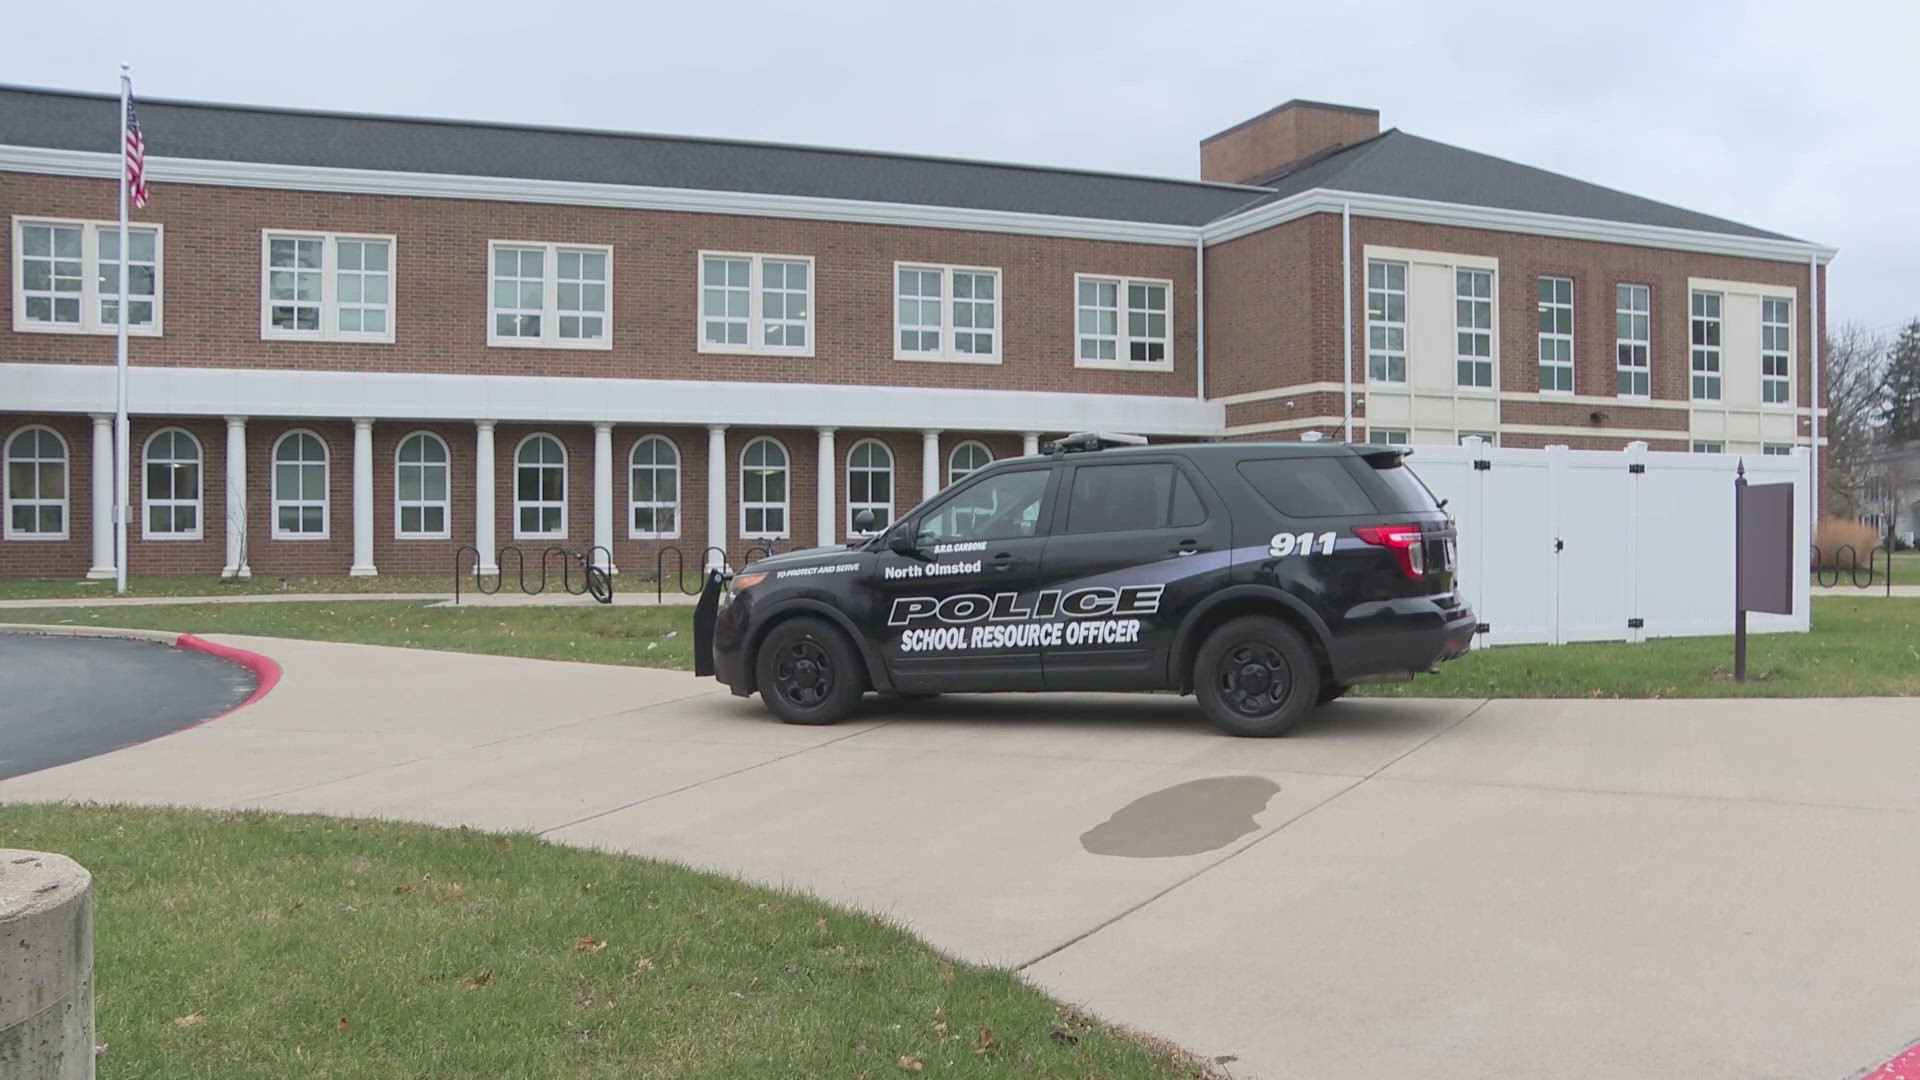 The FBI is currently working with several Northeast Ohio school districts in investigating the threats.